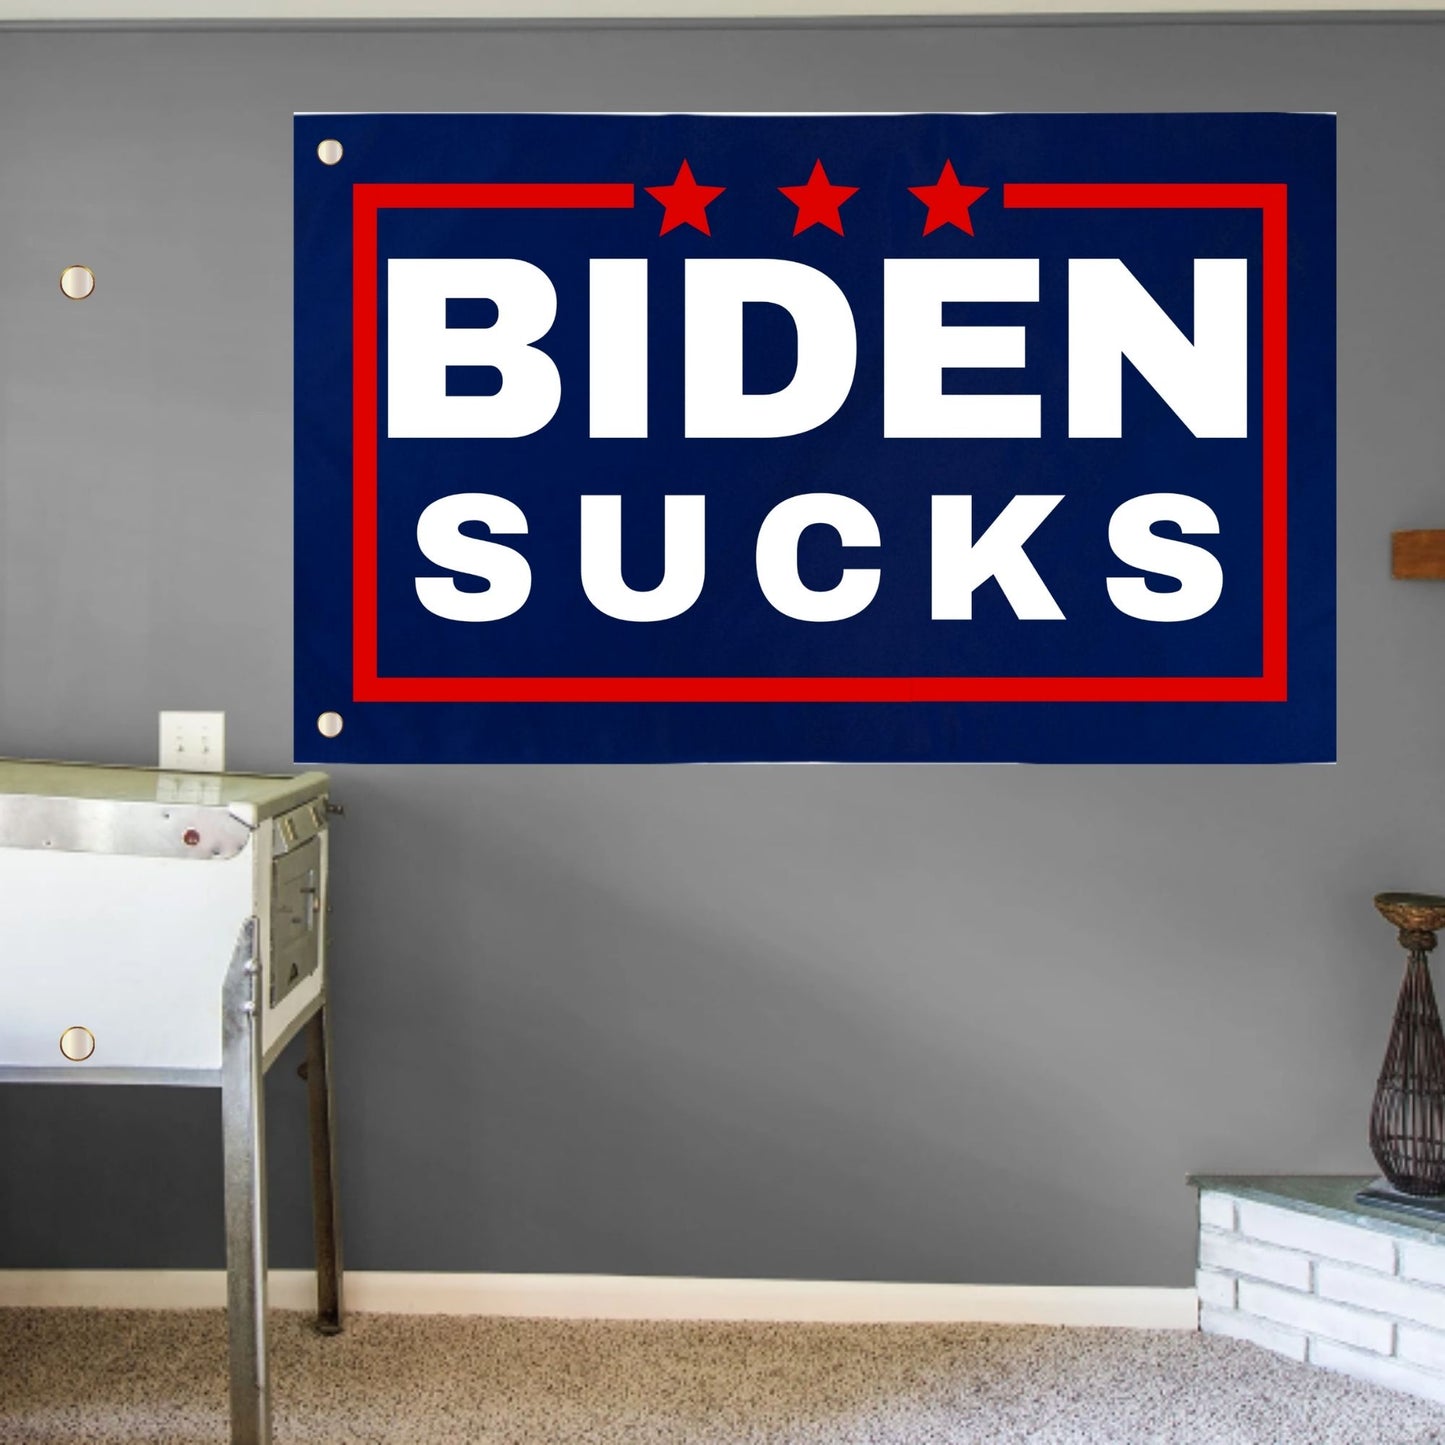 Joe Biden Sucks Wall Flag | Funny Anti Biden 3x5 ft Single-Sided Banner with Grommets | Great Gift Idea for Trump Supporter Republicans